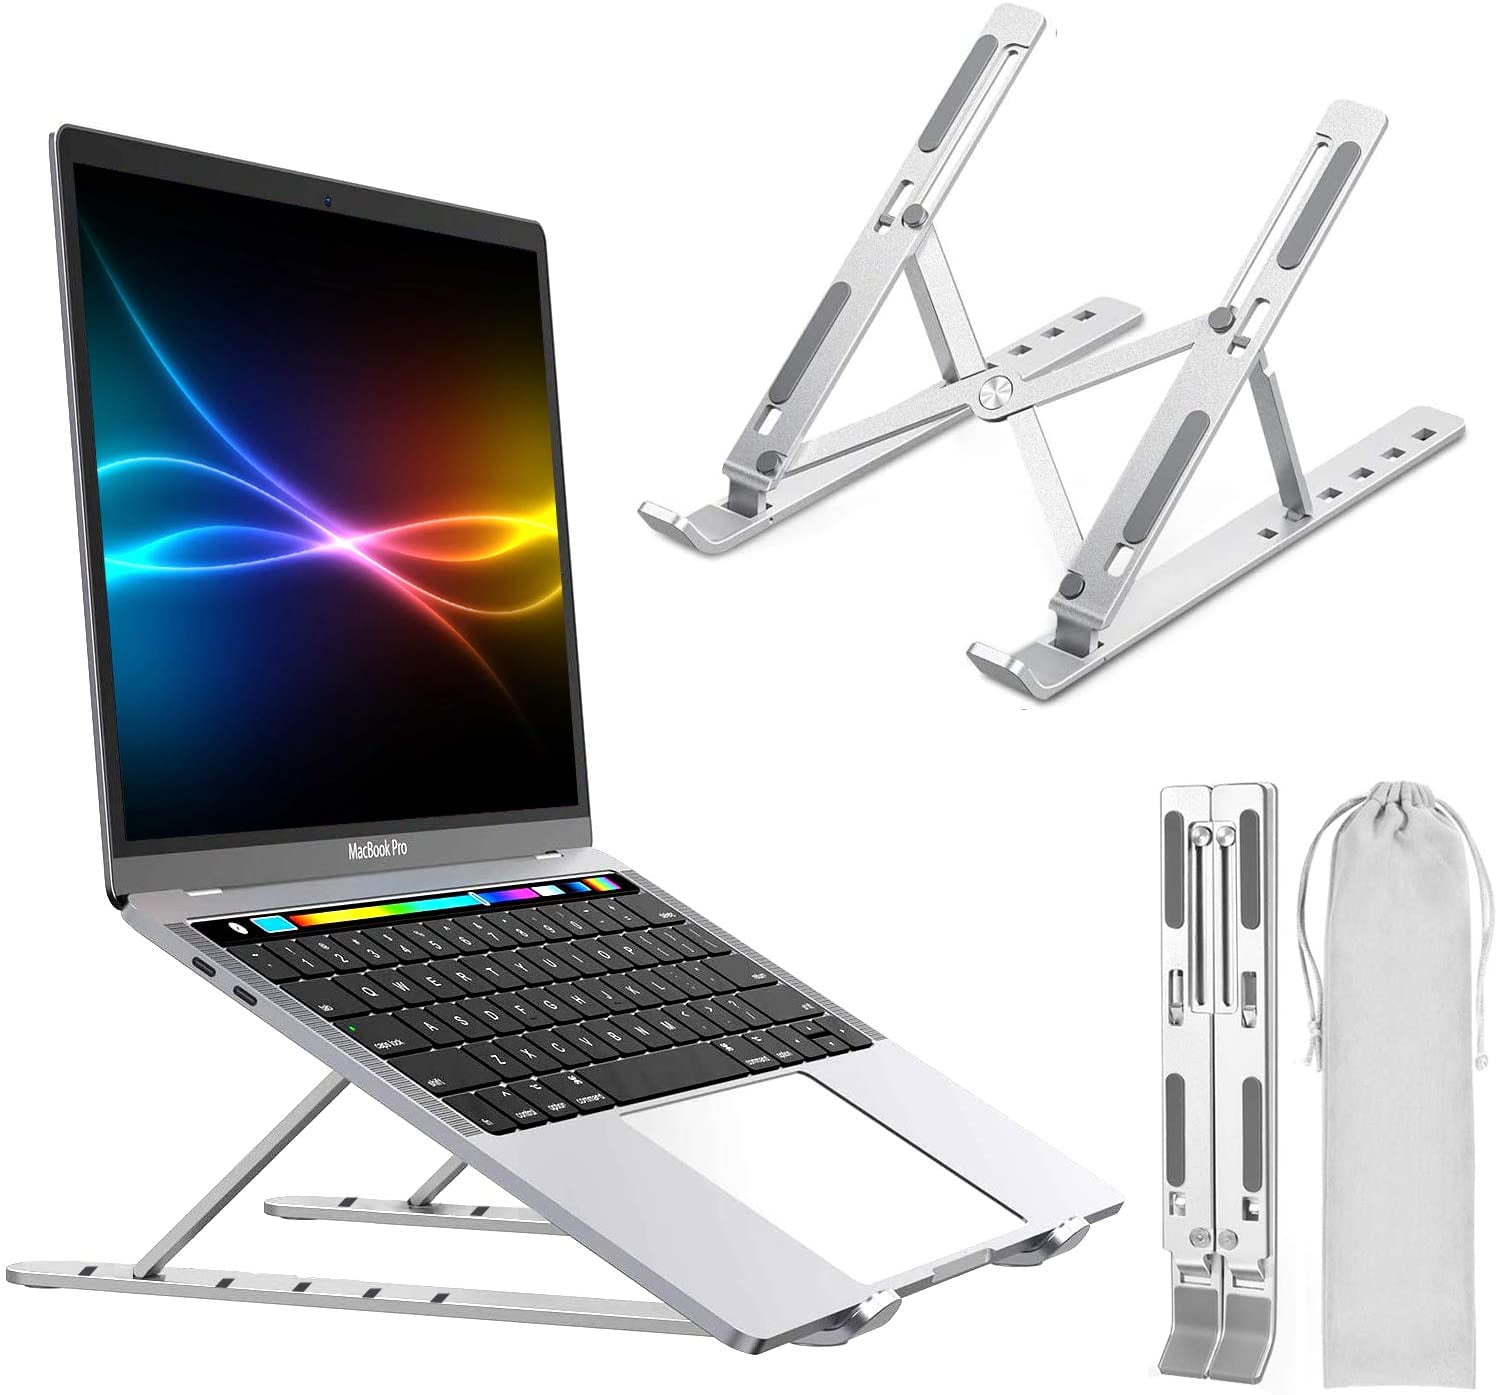 11-17'' Silver iPad Laptop Stand for Desk Laptop Holder| Ergonomic Aluminum Foldable Portable Laptop Stand Riser Computer Tablet Stand Work from Home Compatible with MacBook Dell and Lenovo HP 